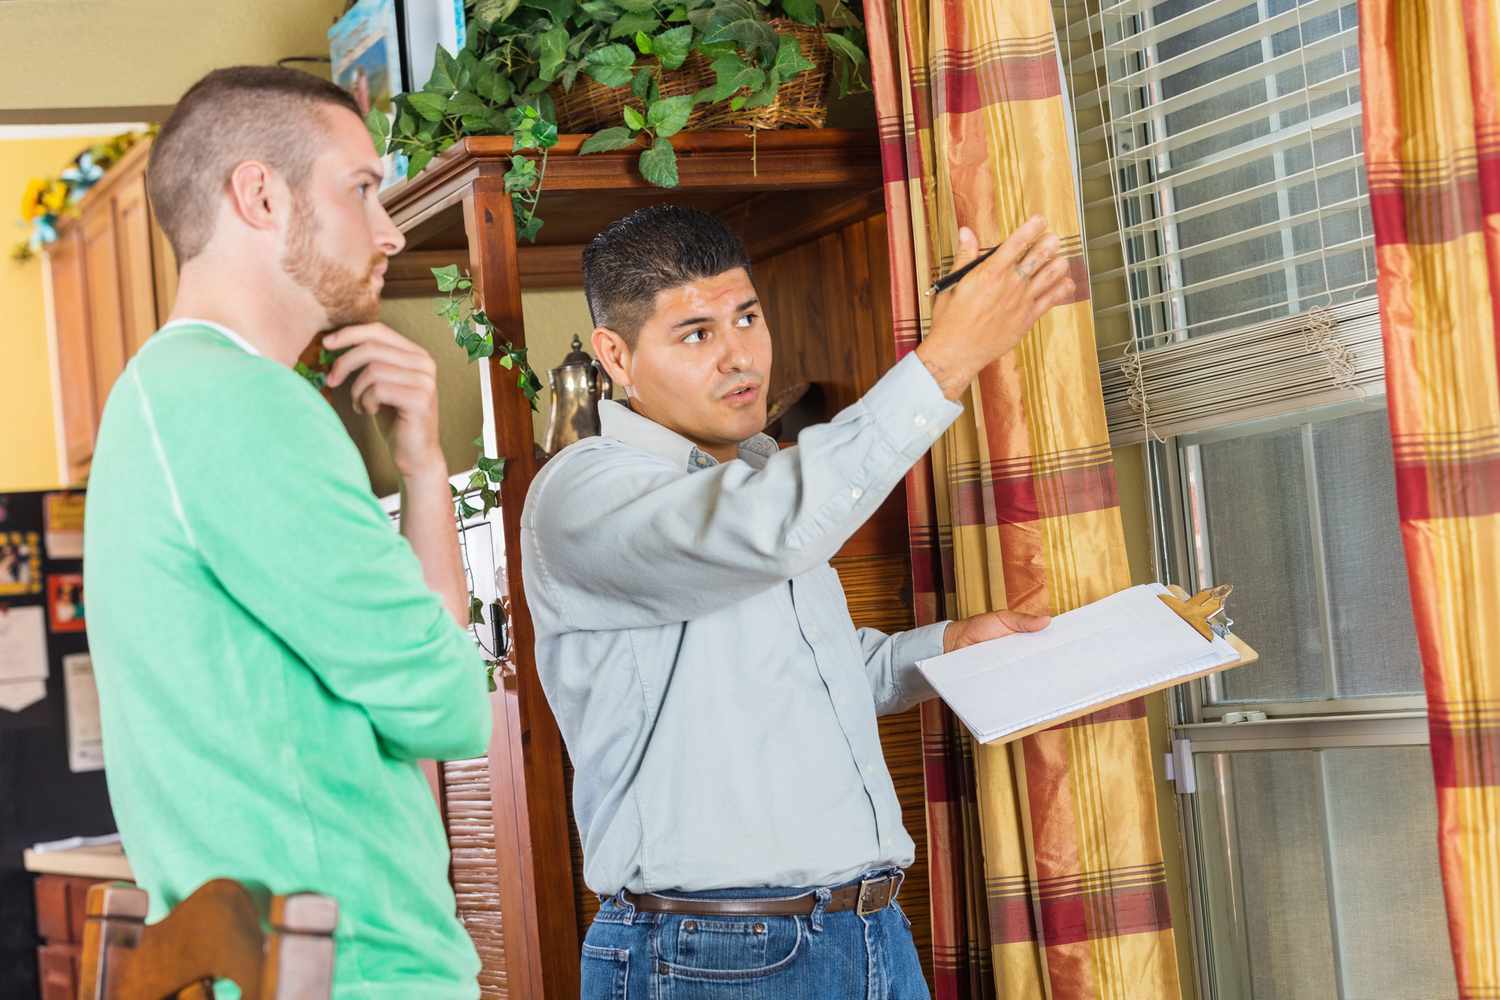 How To Prepare For A Home Inspection As A Buyer